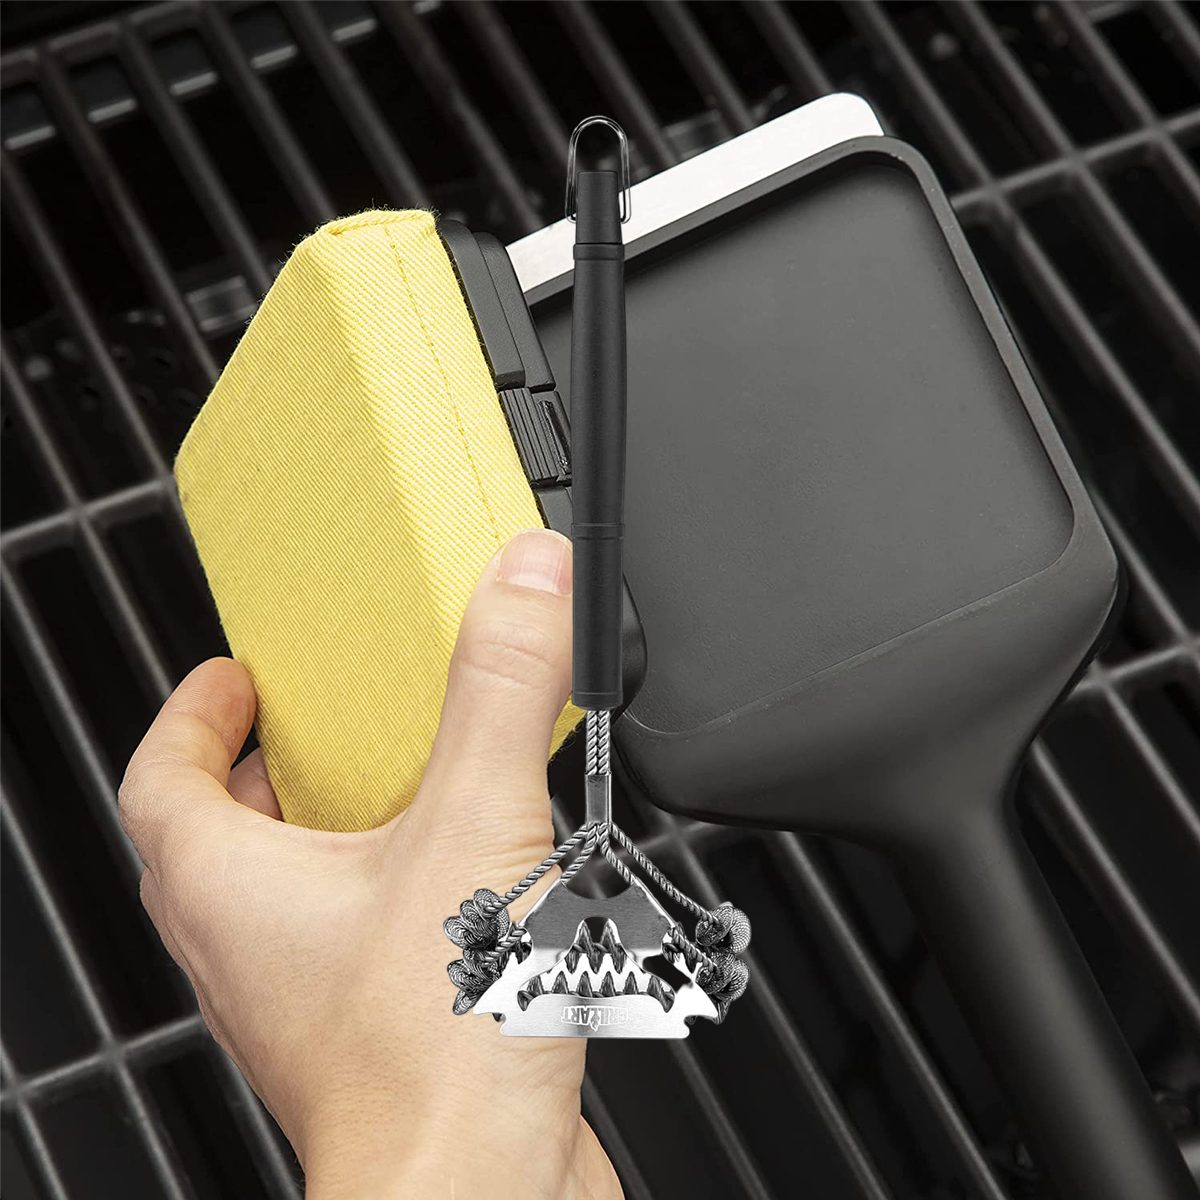 https://www.familyhandyman.com/wp-content/uploads/2023/05/The-6-Best-Grill-Cleaners-to-Tackle-Caked-On-Grease_FT_via-amazon.com_.jpg